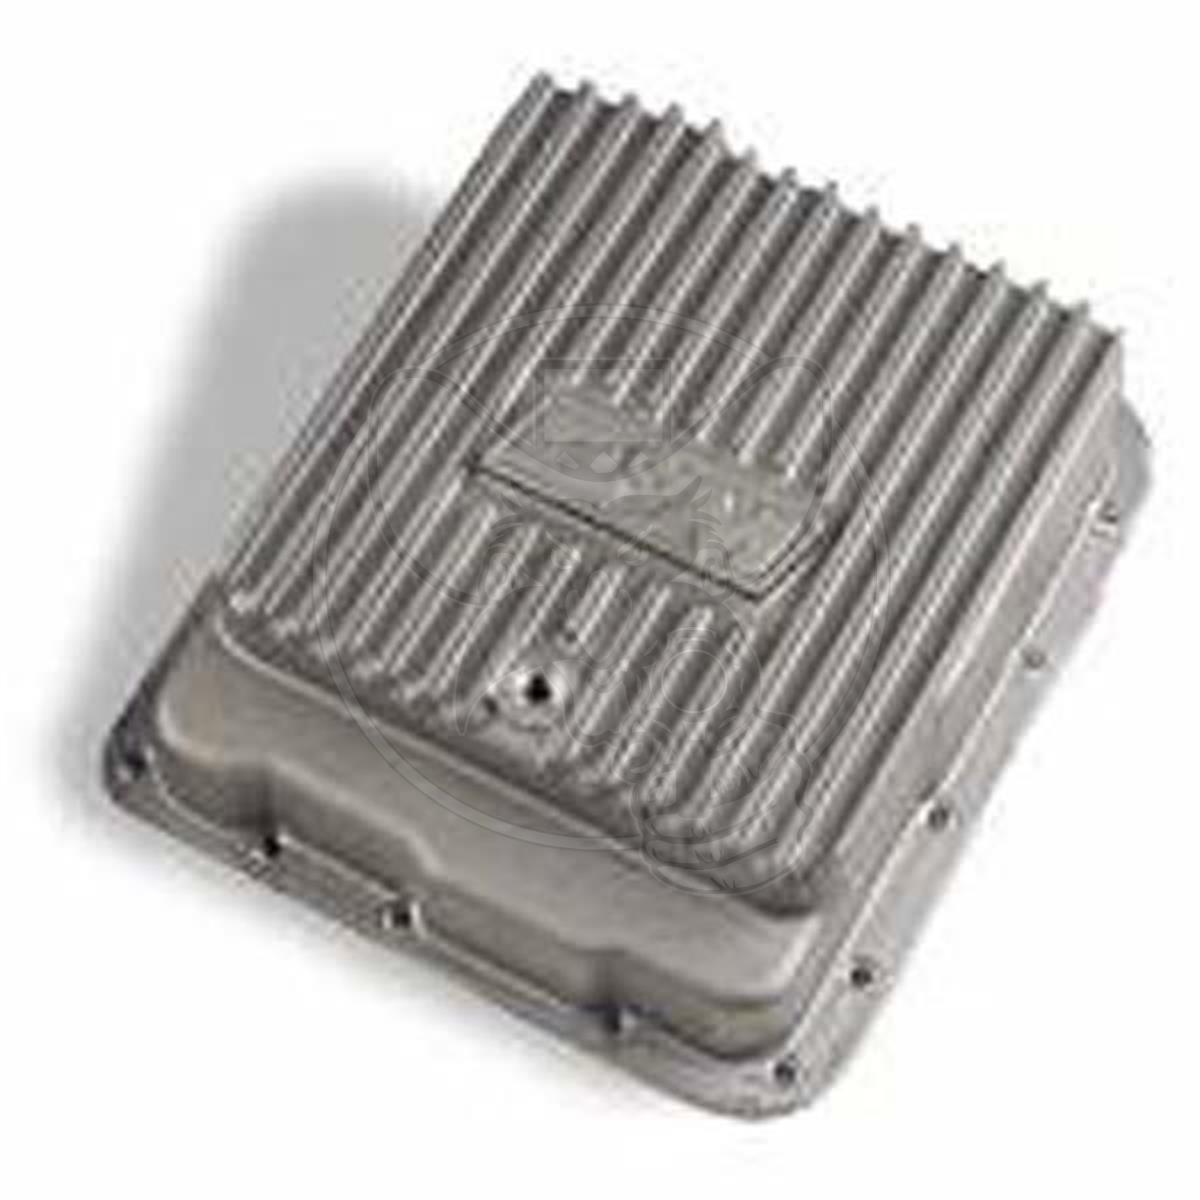 B&M TRANSMISSION PAN ALLOY FINNED FITS FORD C6 EXTRA CAPACITY